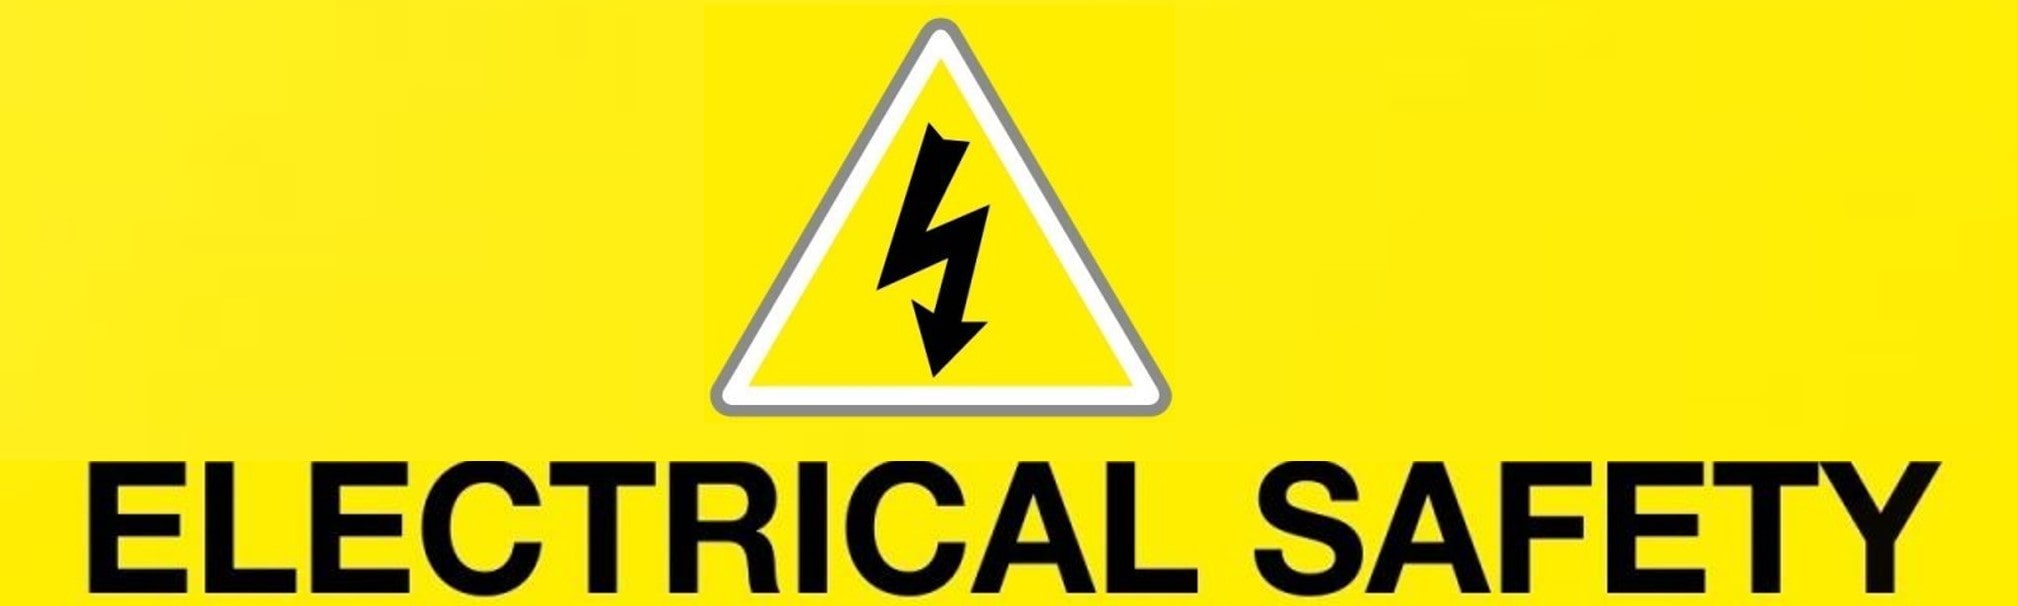 electric-safety